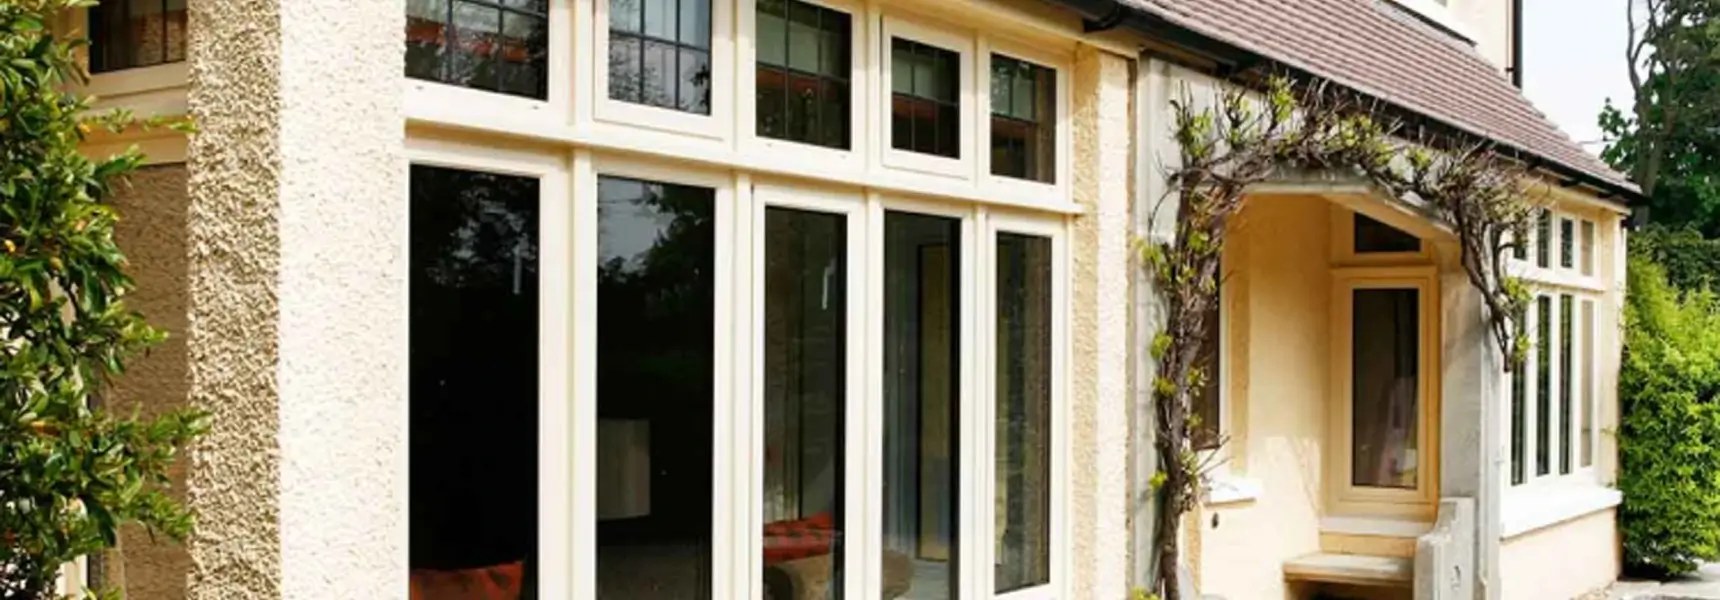 Invest In New Aluminum Windows for An Improved Home